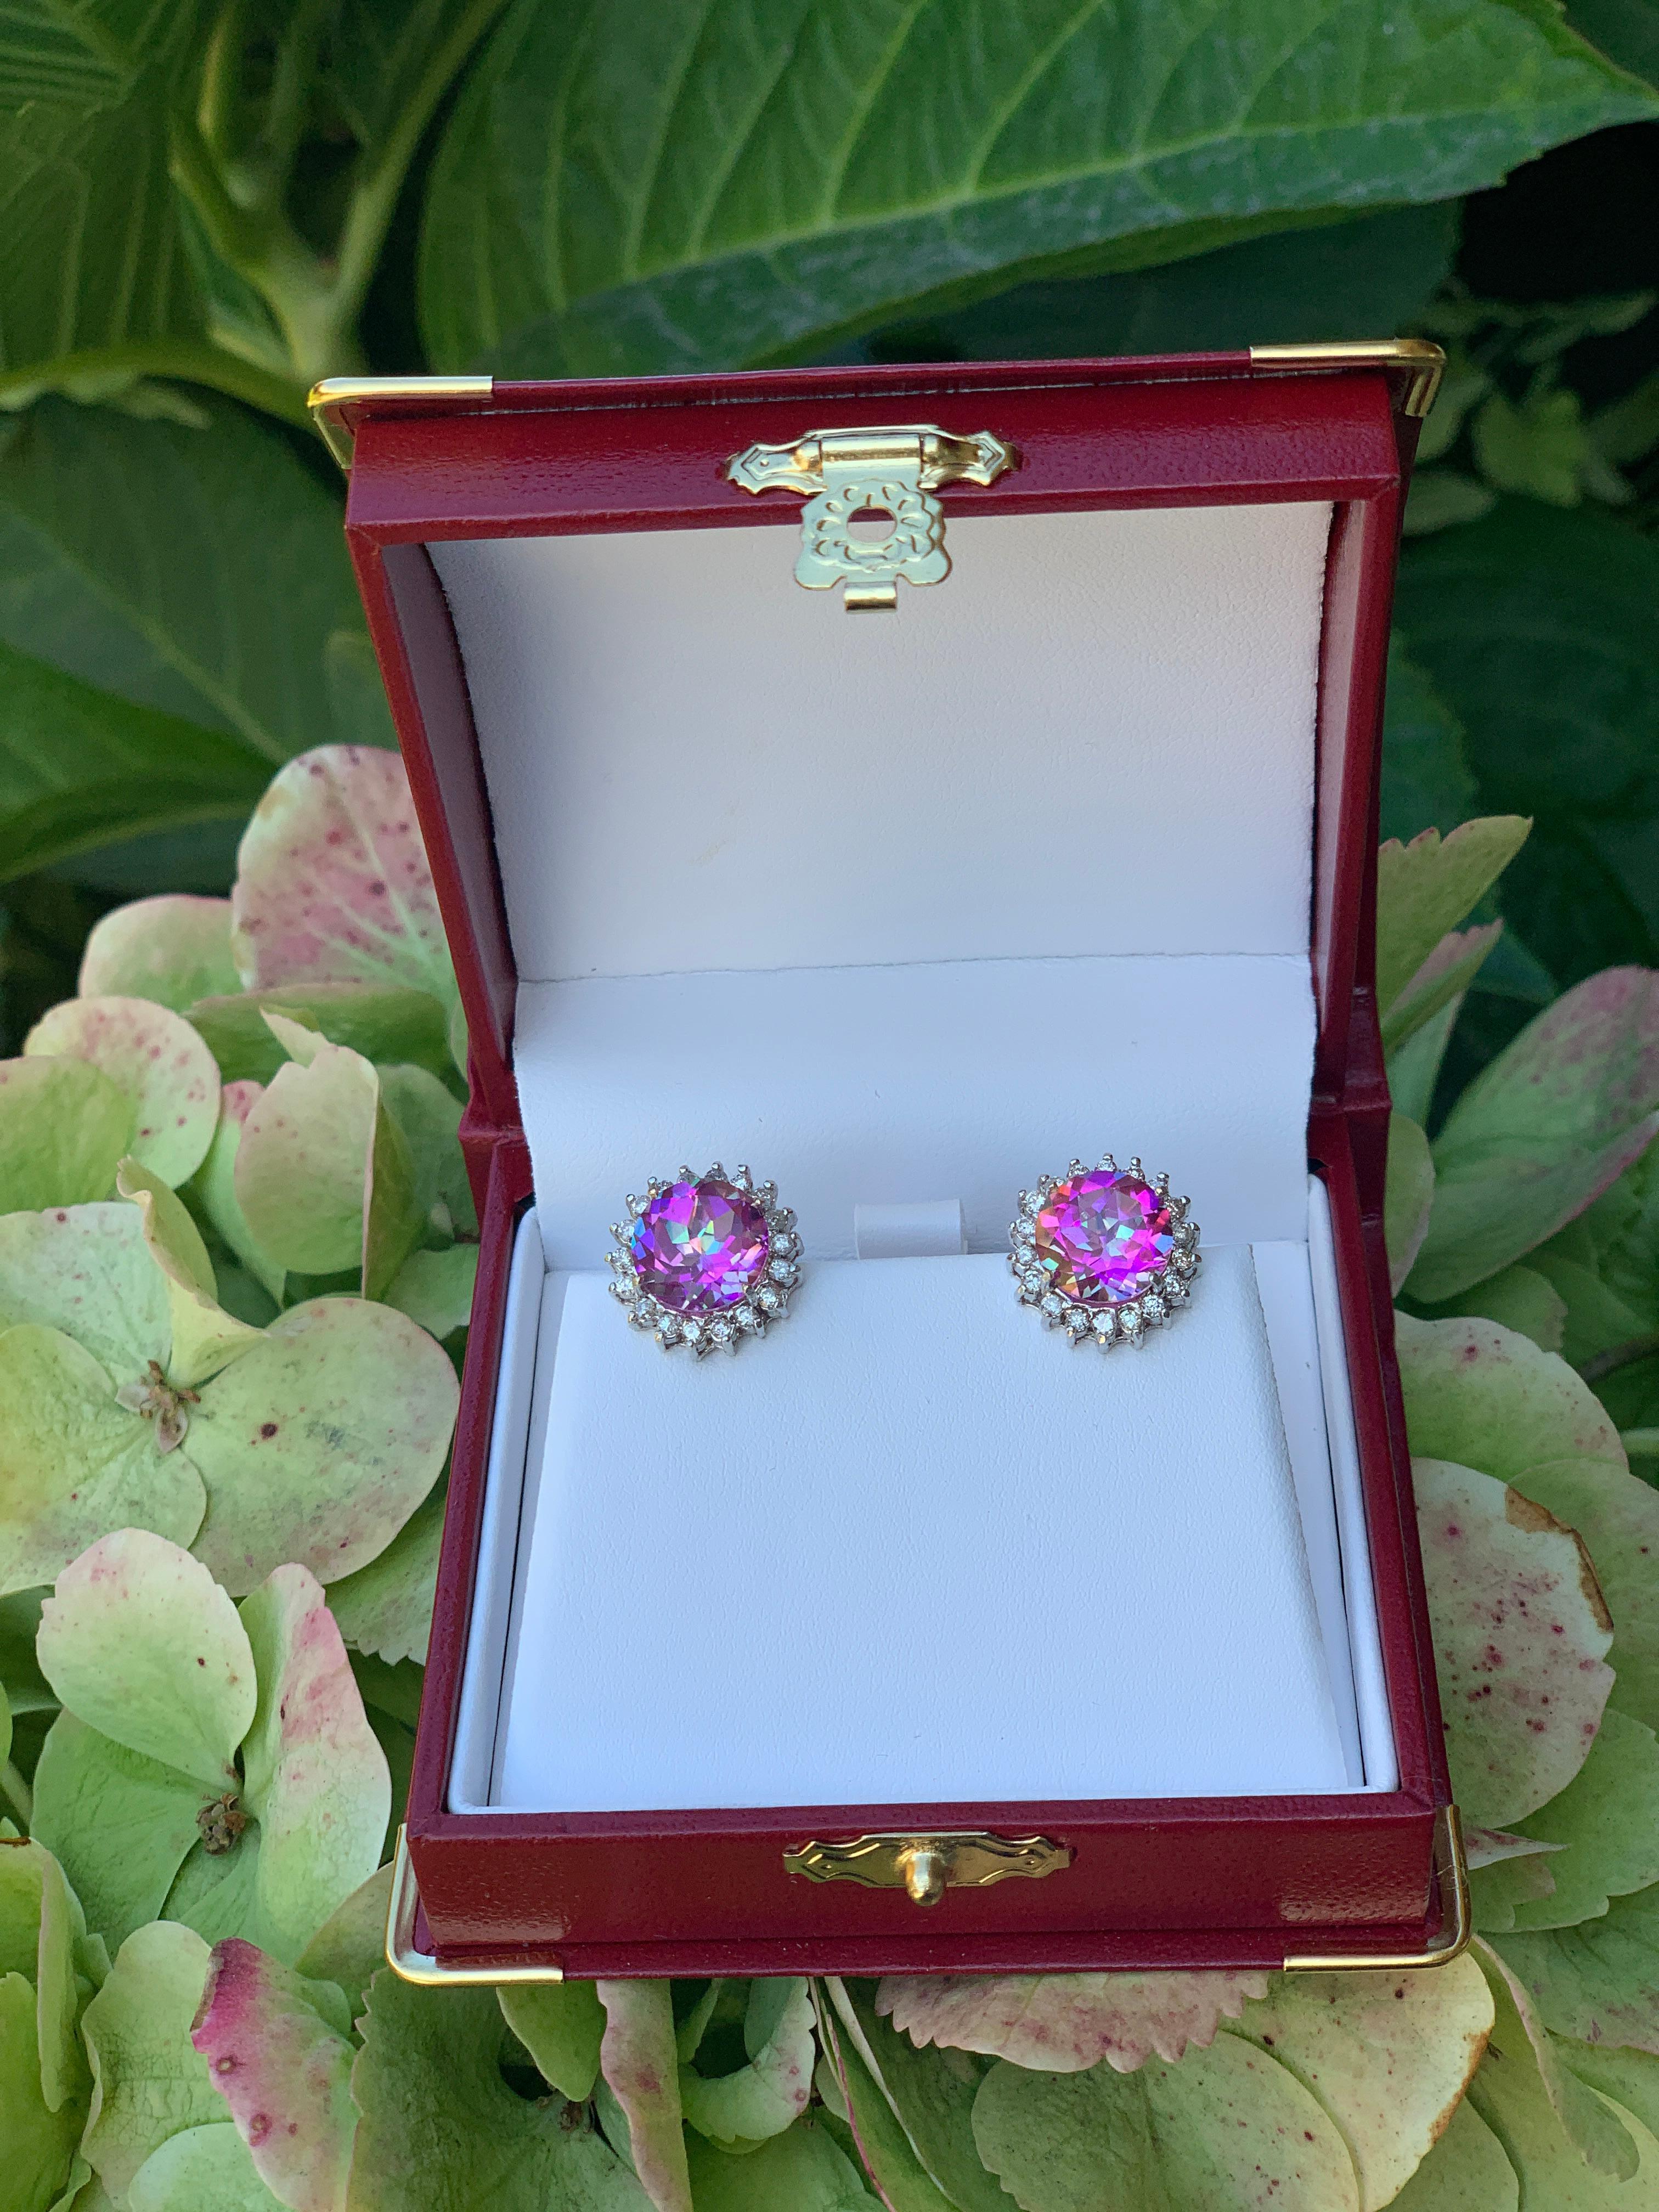 Fabulous bright pink mystic topazes are round brilliant cut and reflect sparks as if lit from within.  The topazes are prong set in 14 karat white gold and surrounded by a sparkling halo of prong set round brilliant diamonds to create a dazzling